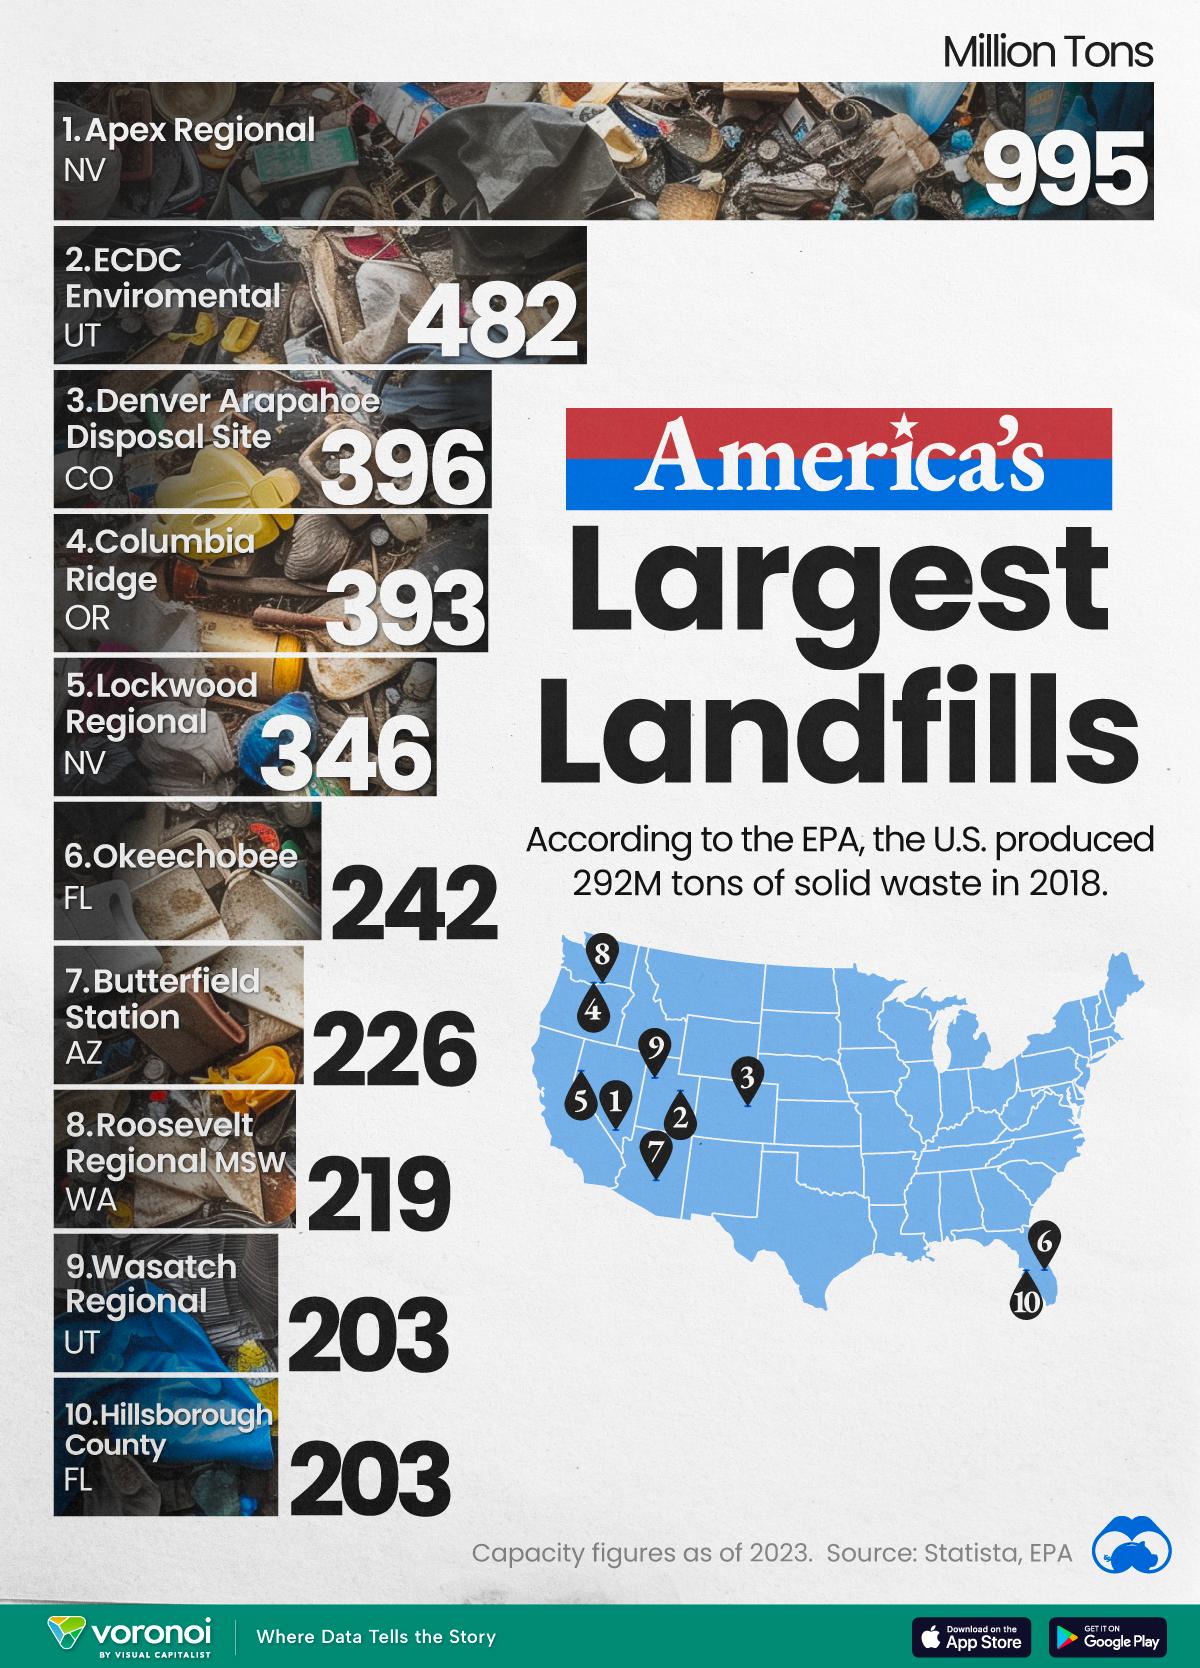 A map and bar chart ranking the largest landfills by capacity in the U.S.